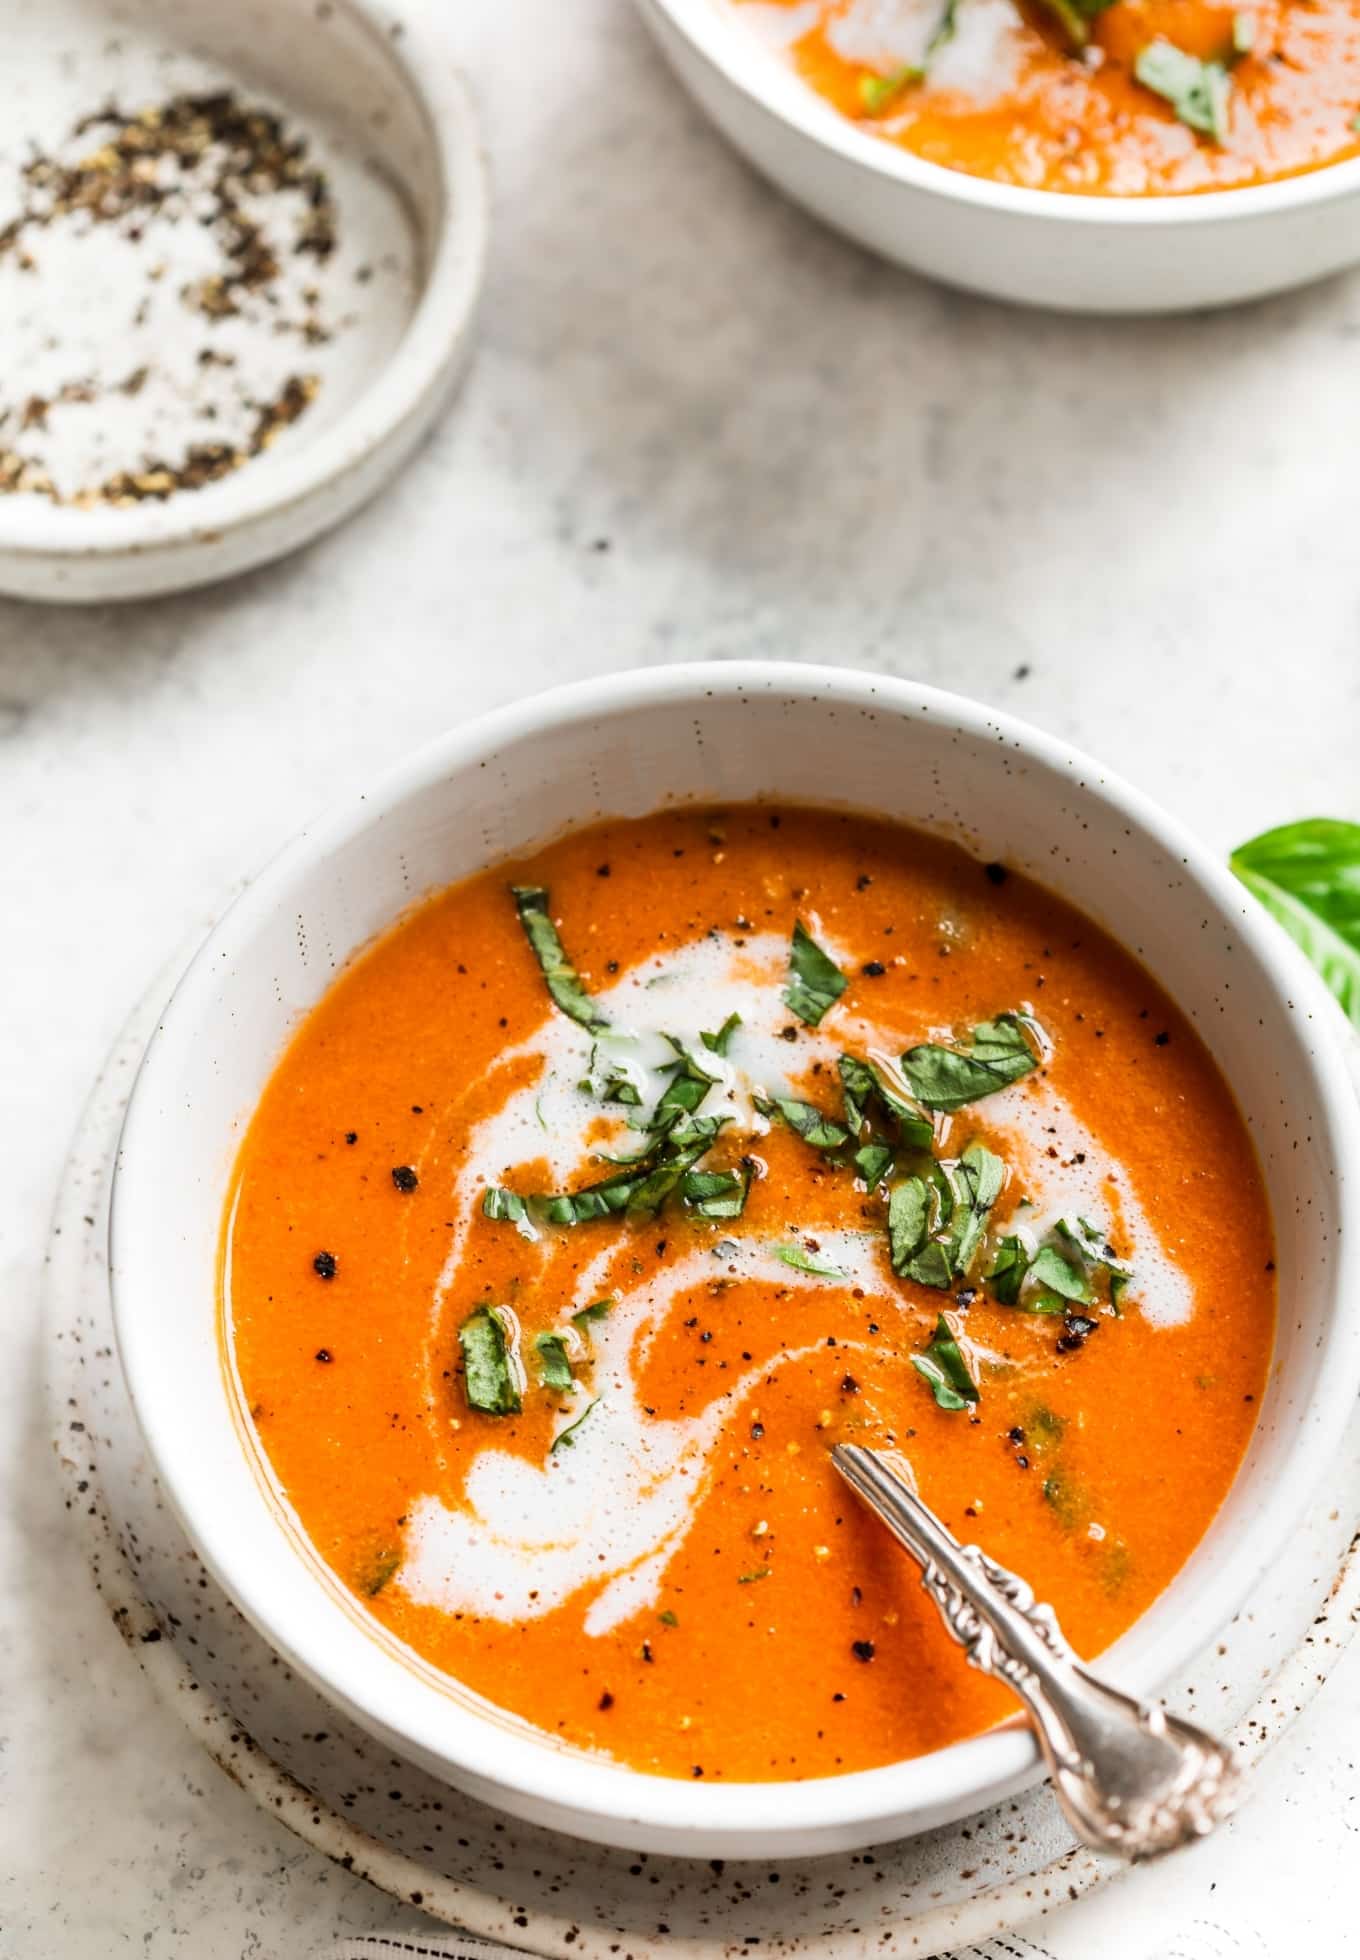 https://thewholecook.com/wp-content/uploads/2021/02/30-Minute-Dairy-Free-Tomato-Basil-Soup-by-The-Whole-Cook-vertical1.jpg